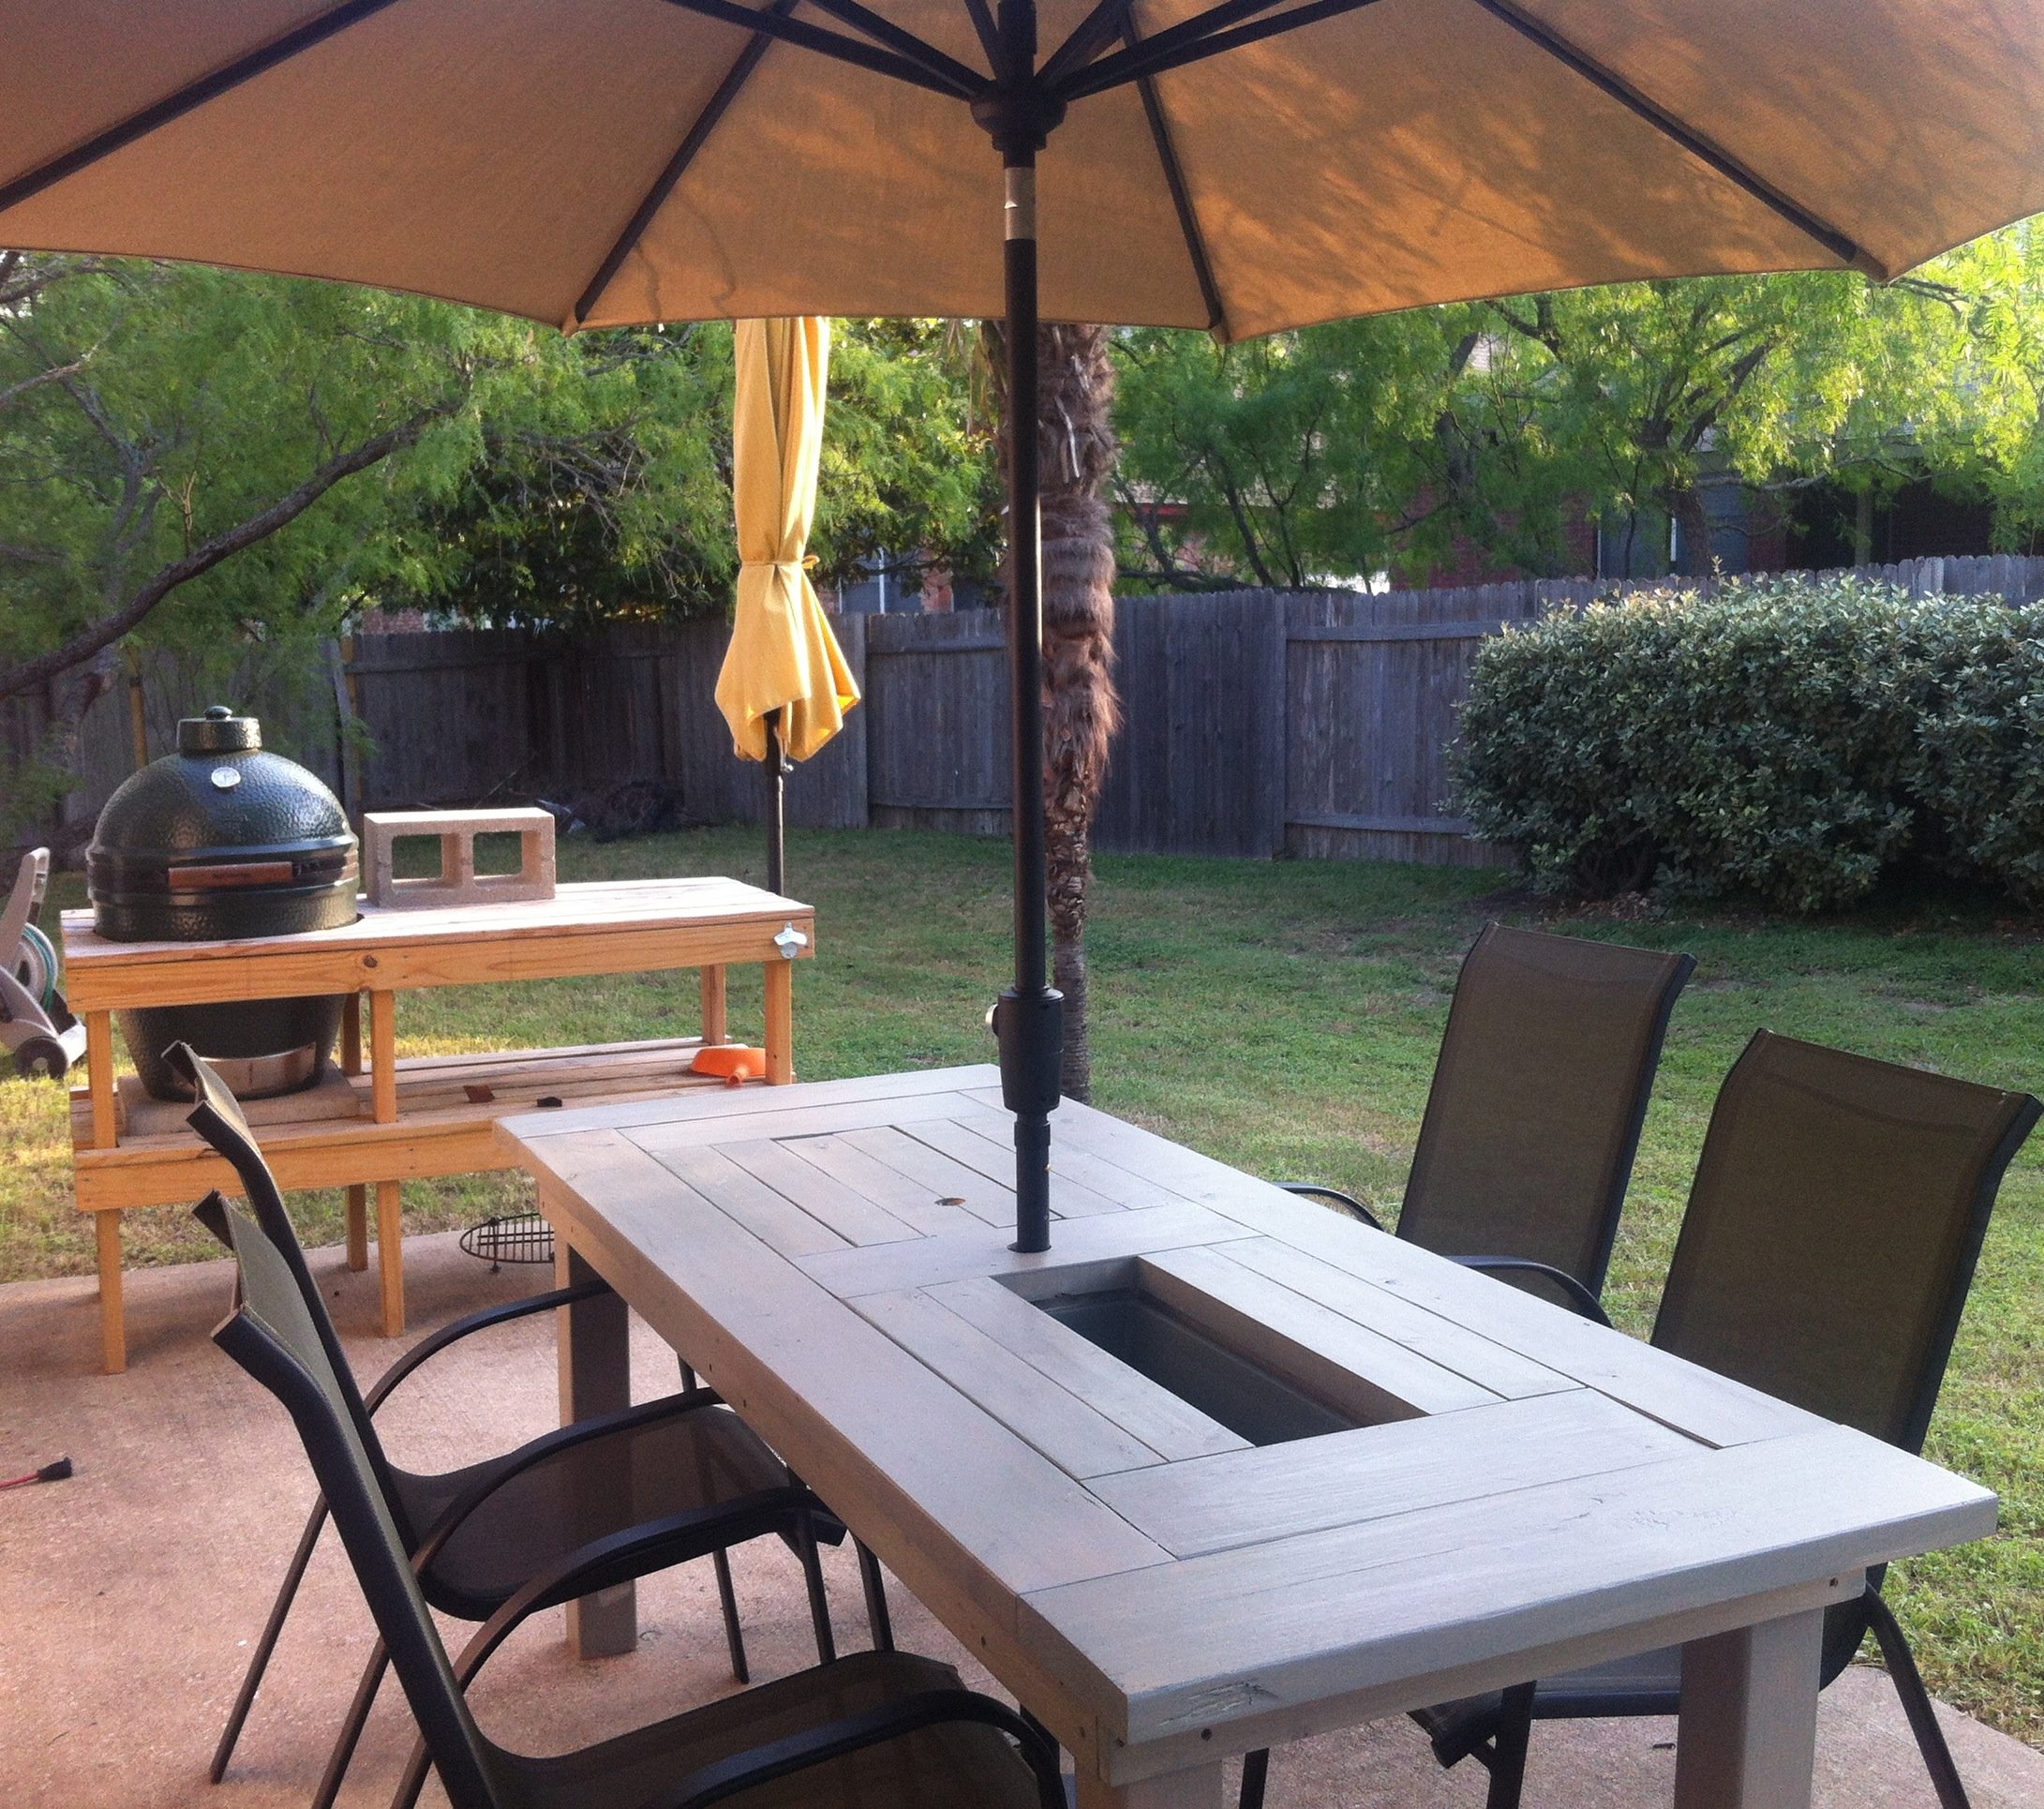 Ana White | Patio Table with Built-in Beer/Wine Coolers - DIY Projects